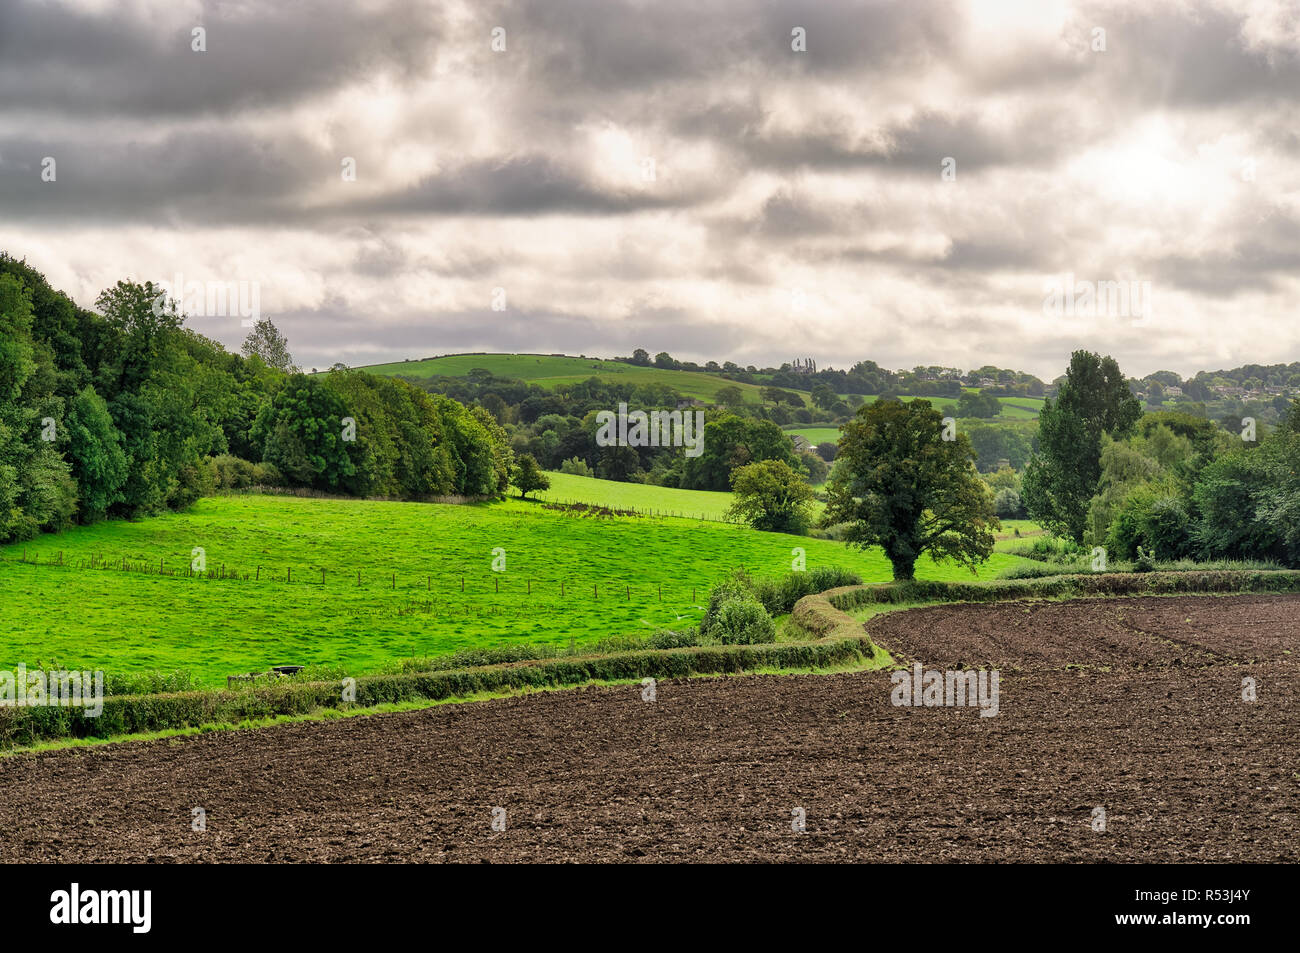 A rural English scene with a ploughed field. Stock Photo